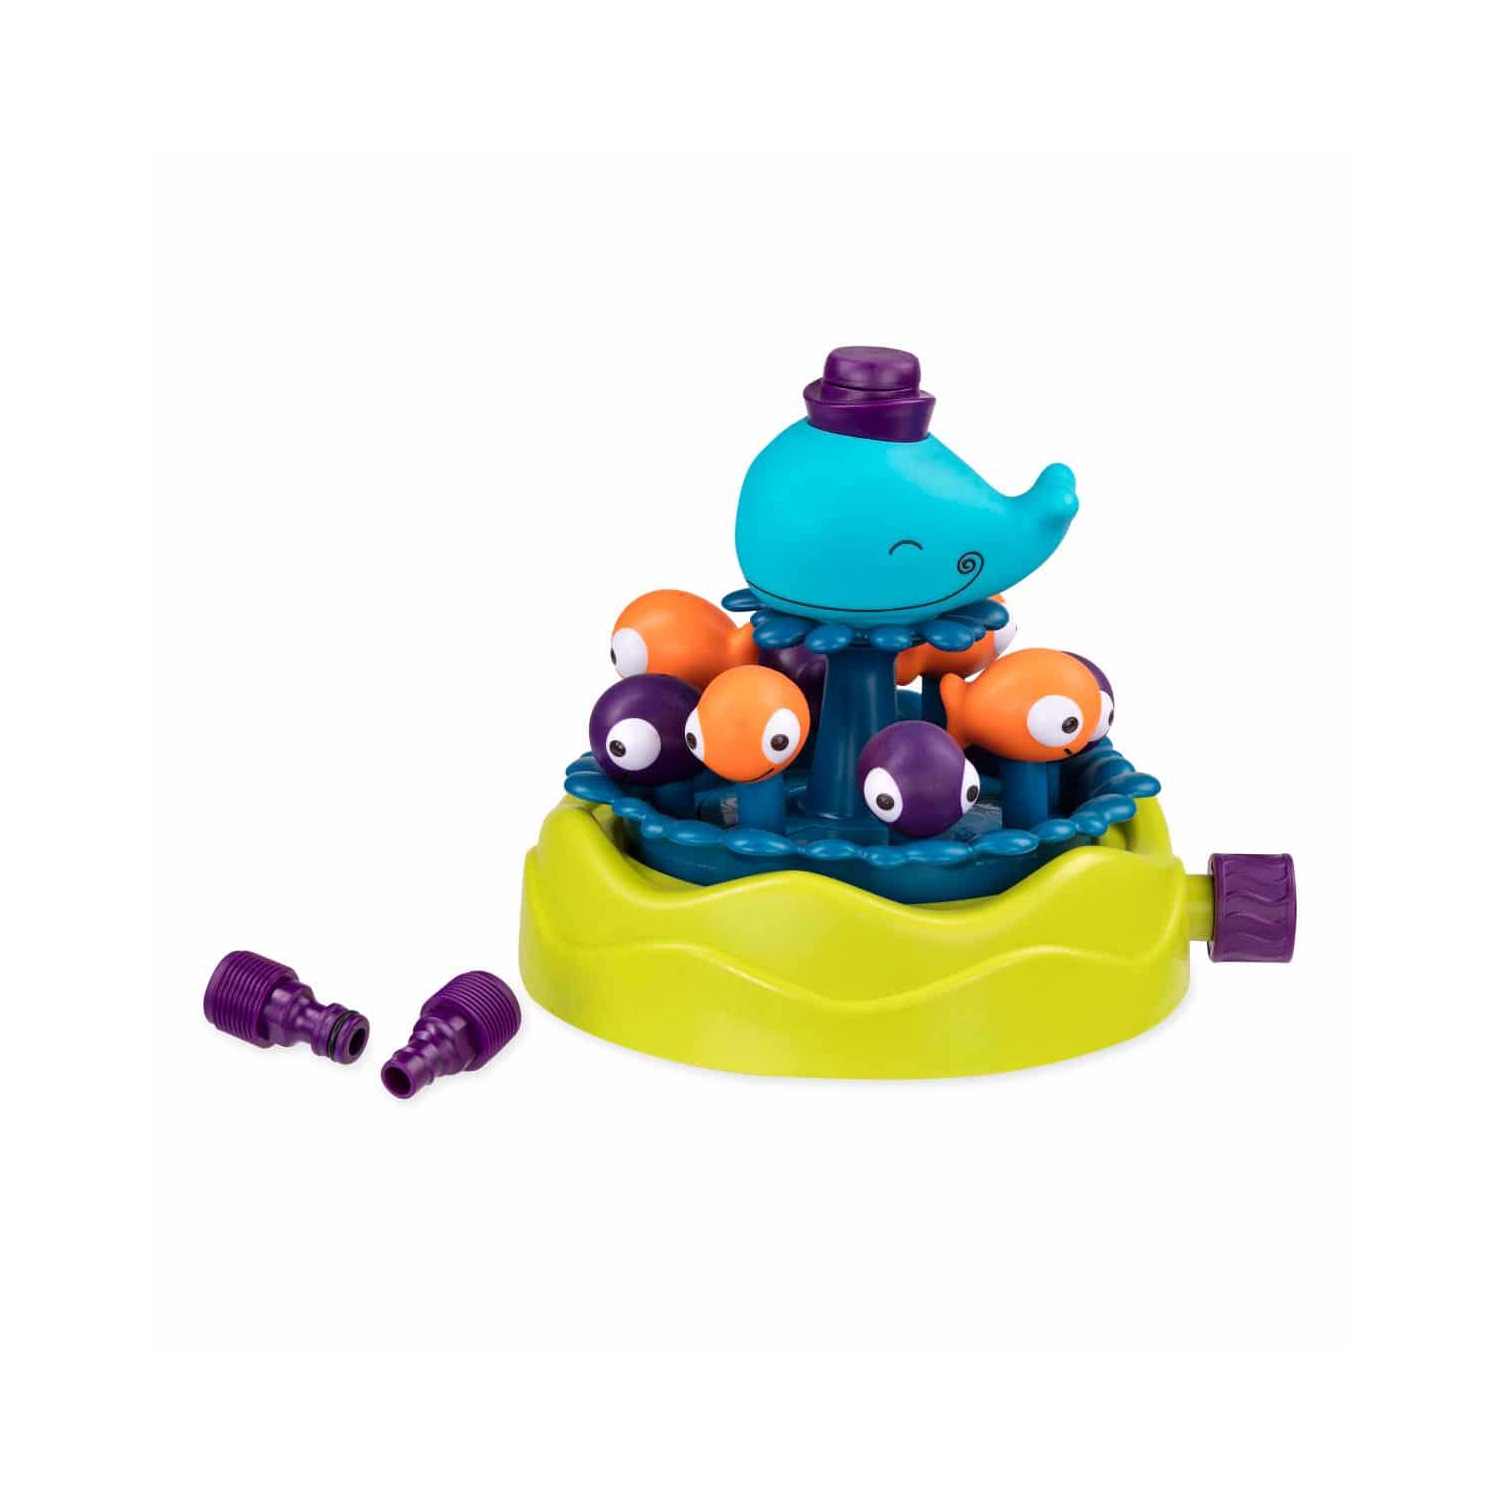 B Toys - Whirly Whale Sprinkler